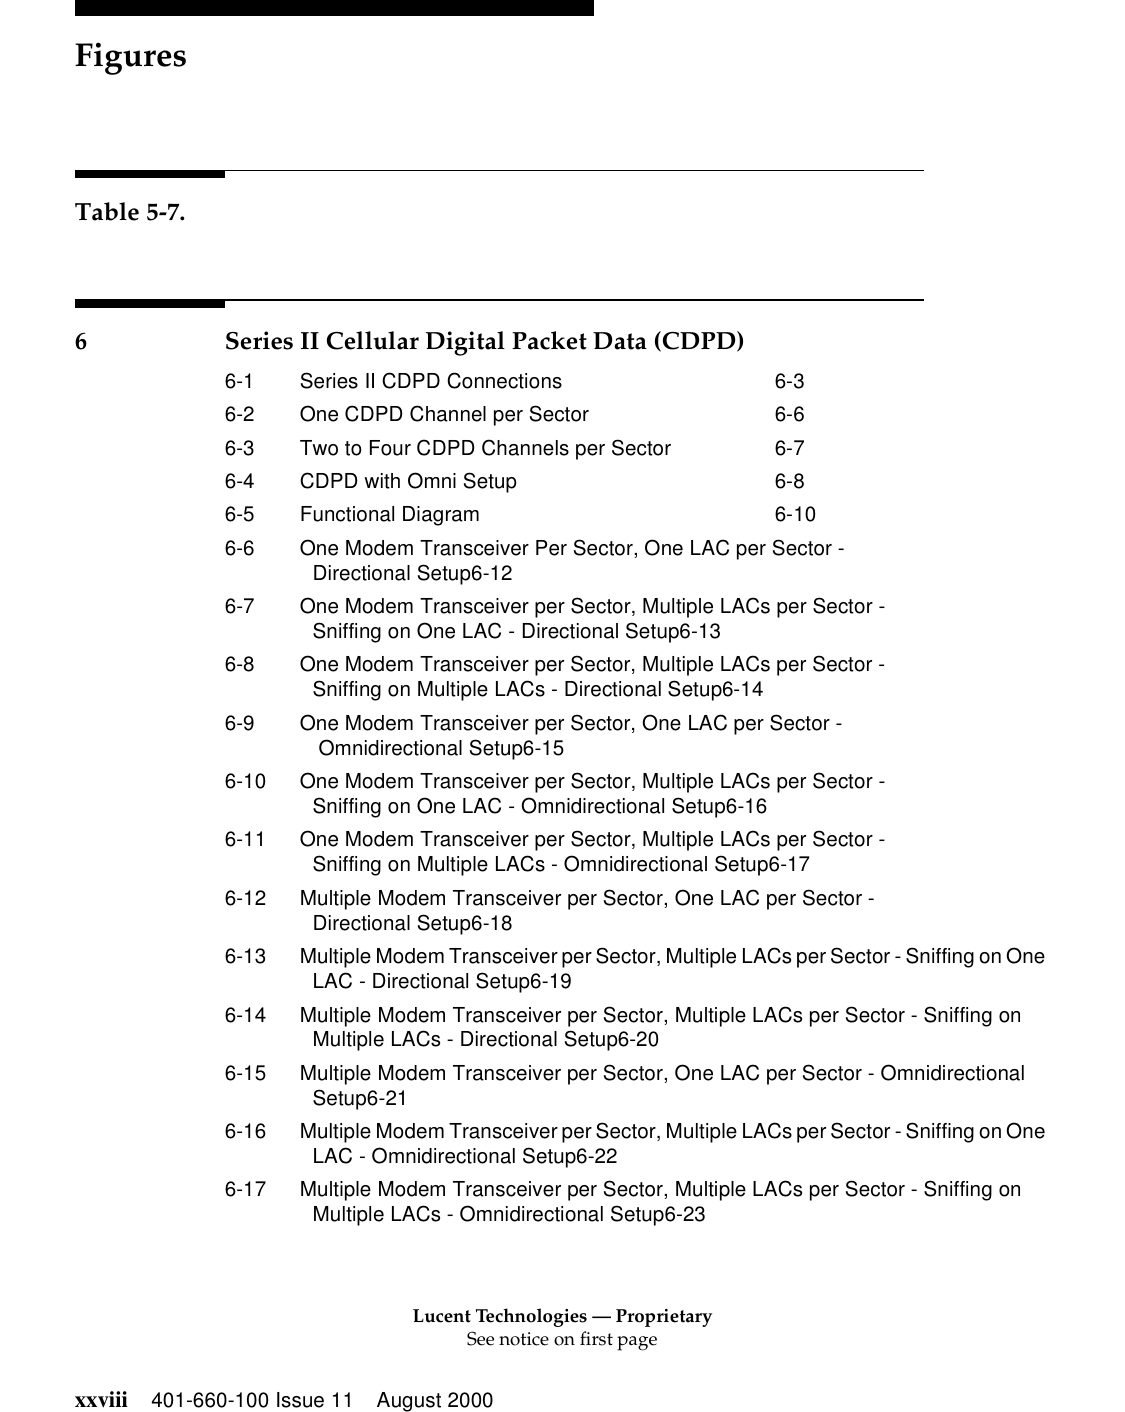 Lucent Technologies — ProprietarySee notice on first pageFiguresxxviii 401-660-100 Issue 11 August 2000Table 5-7.6 Series II Cellular Digital Packet Data (CDPD)6-1 Series II CDPD Connections 6-36-2 One CDPD Channel per Sector 6-66-3 Two to Four CDPD Channels per Sector 6-76-4 CDPD with Omni Setup 6-86-5 Functional Diagram 6-106-6 One Modem Transceiver Per Sector, One LAC per Sector -Directional Setup6-126-7 One Modem Transceiver per Sector, Multiple LACs per Sector -Sniffing on One LAC - Directional Setup6-136-8 One Modem Transceiver per Sector, Multiple LACs per Sector -Sniffing on Multiple LACs - Directional Setup6-146-9 One Modem Transceiver per Sector, One LAC per Sector - Omnidirectional Setup6-156-10 One Modem Transceiver per Sector, Multiple LACs per Sector -Sniffing on One LAC - Omnidirectional Setup6-166-11 One Modem Transceiver per Sector, Multiple LACs per Sector -Sniffing on Multiple LACs - Omnidirectional Setup6-176-12 Multiple Modem Transceiver per Sector, One LAC per Sector -Directional Setup6-186-13 Multiple Modem Transceiver per Sector, Multiple LACs per Sector - Sniffing on One LAC - Directional Setup6-196-14 Multiple Modem Transceiver per Sector, Multiple LACs per Sector - Sniffing on Multiple LACs - Directional Setup6-206-15 Multiple Modem Transceiver per Sector, One LAC per Sector - Omnidirectional Setup6-216-16 Multiple Modem Transceiver per Sector, Multiple LACs per Sector - Sniffing on One LAC - Omnidirectional Setup6-226-17 Multiple Modem Transceiver per Sector, Multiple LACs per Sector - Sniffing on Multiple LACs - Omnidirectional Setup6-23